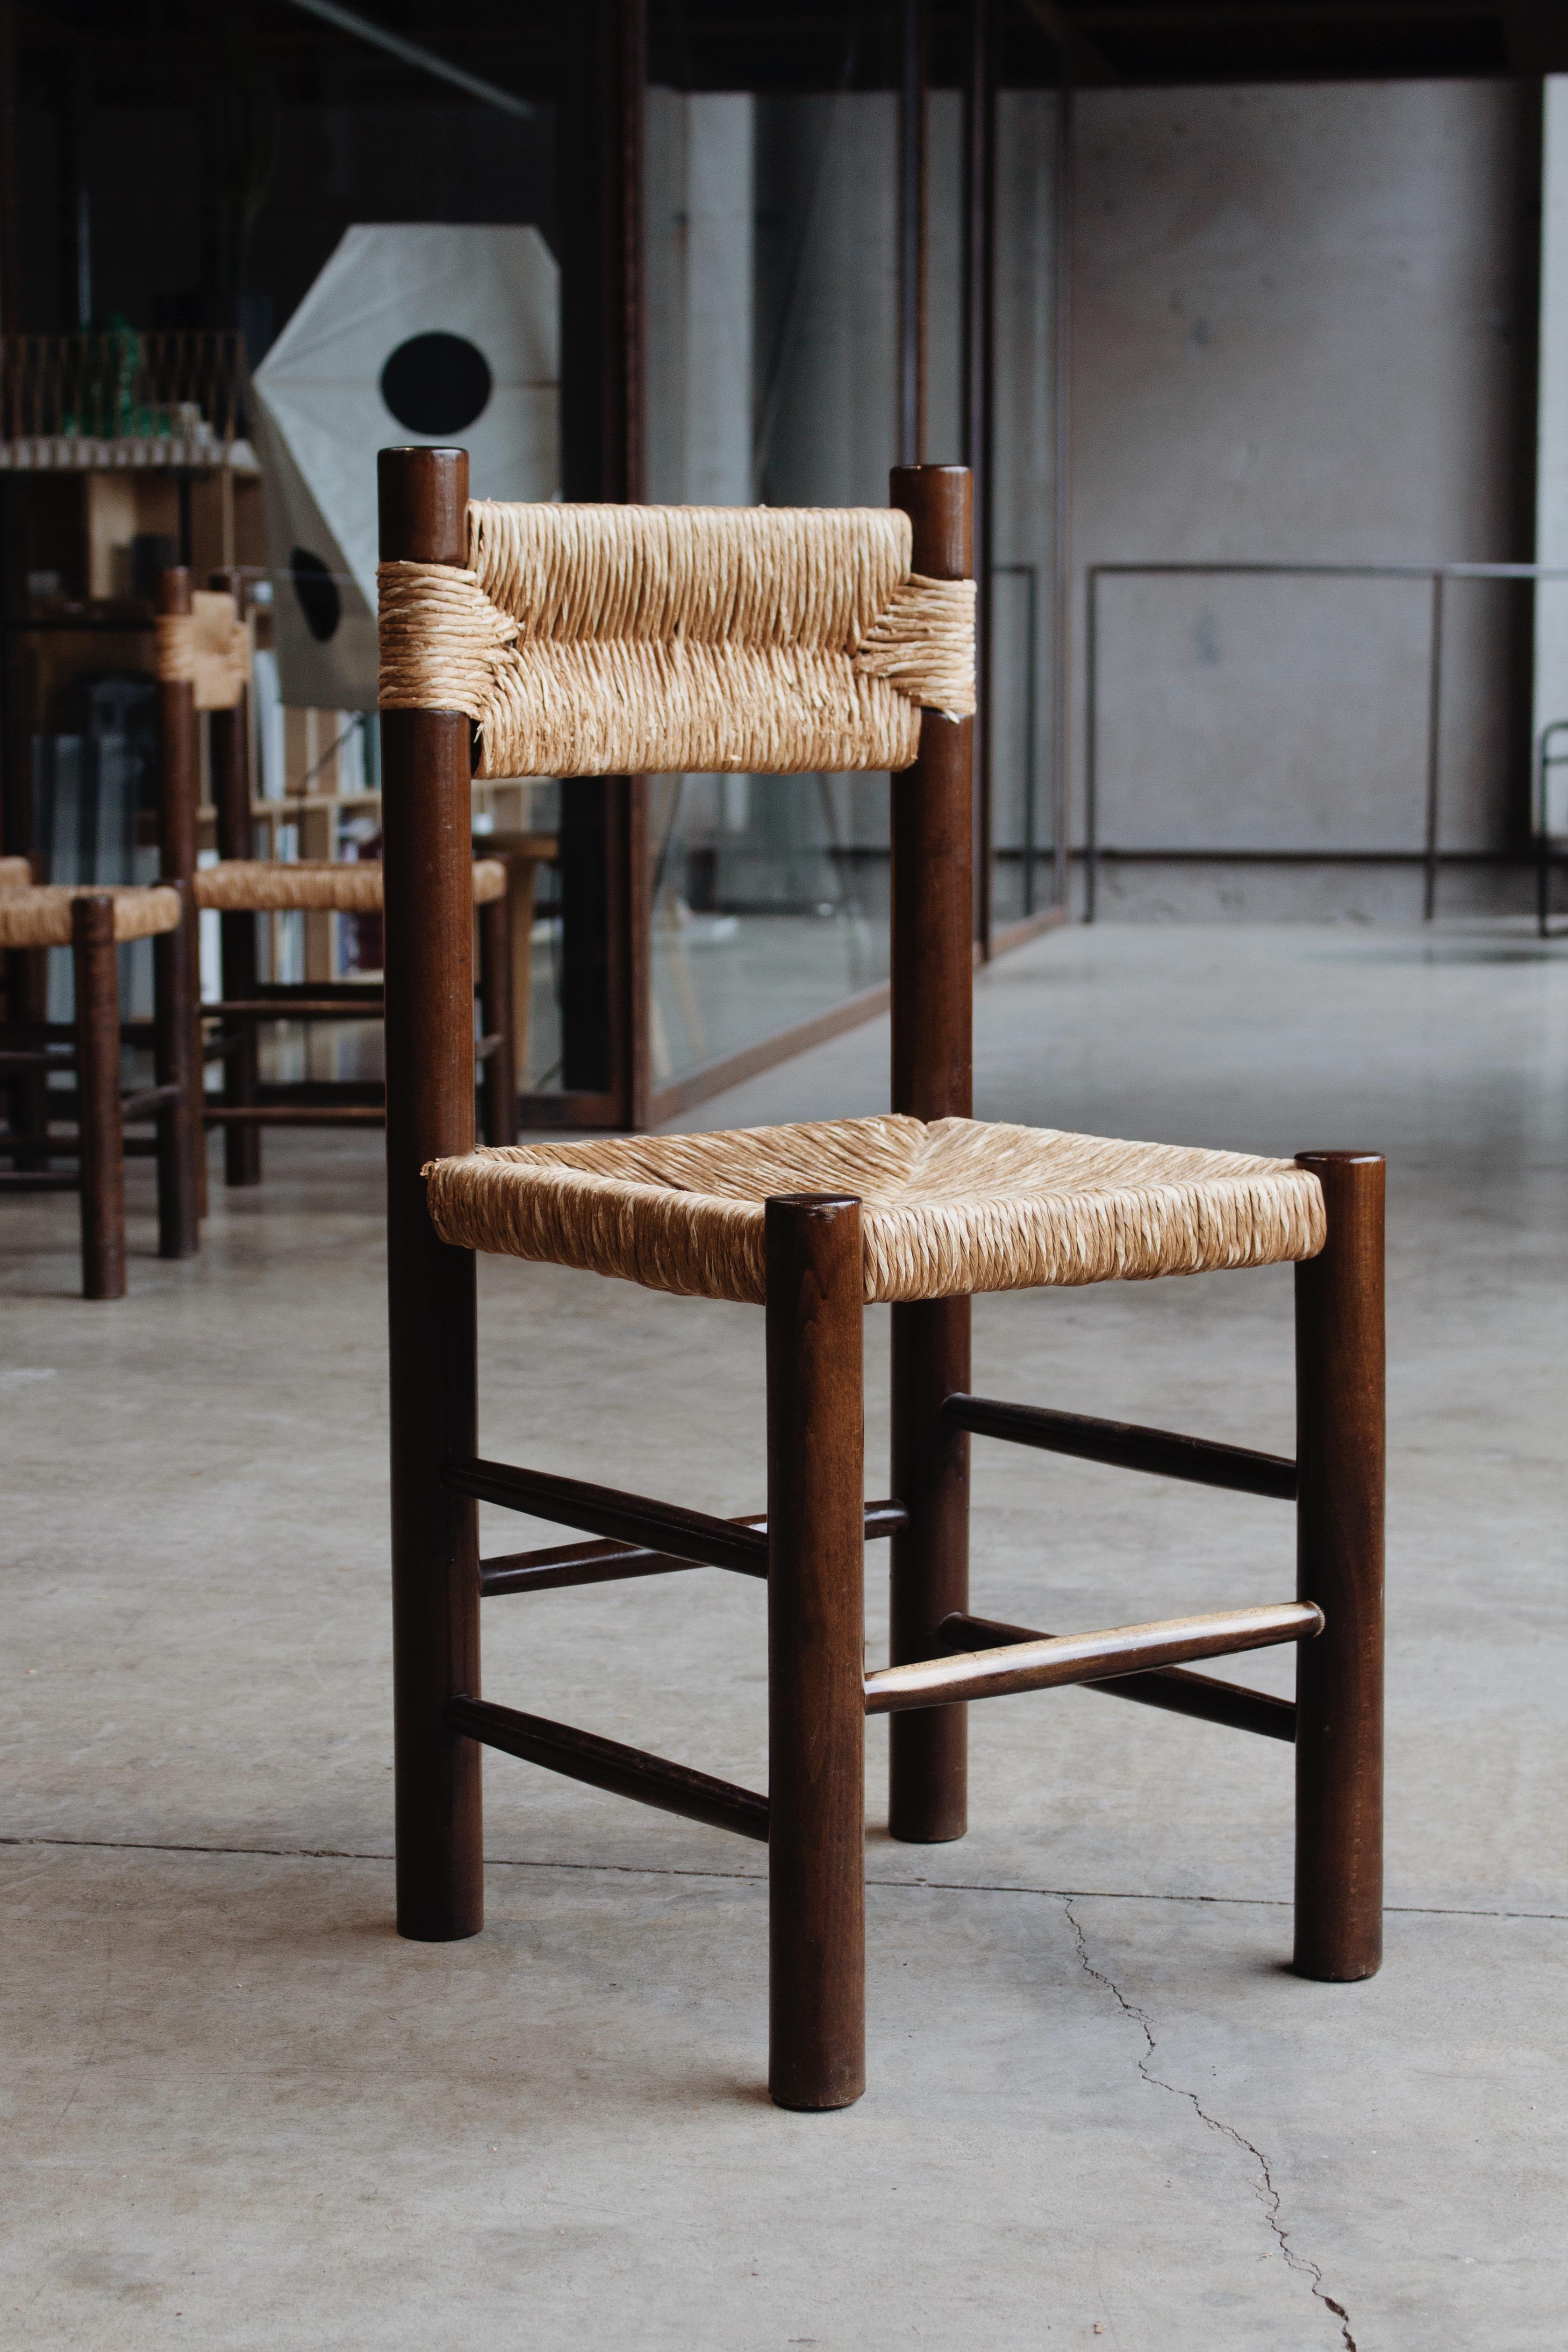 Charlotte Perriand Dining Chairs for Robert Sentou, straw and wood, France, 1964, set of eight. 

The chairs have a simple and timeless design. The fancy backrest and seat in straw combined with the pinewood structure form a truly balanced